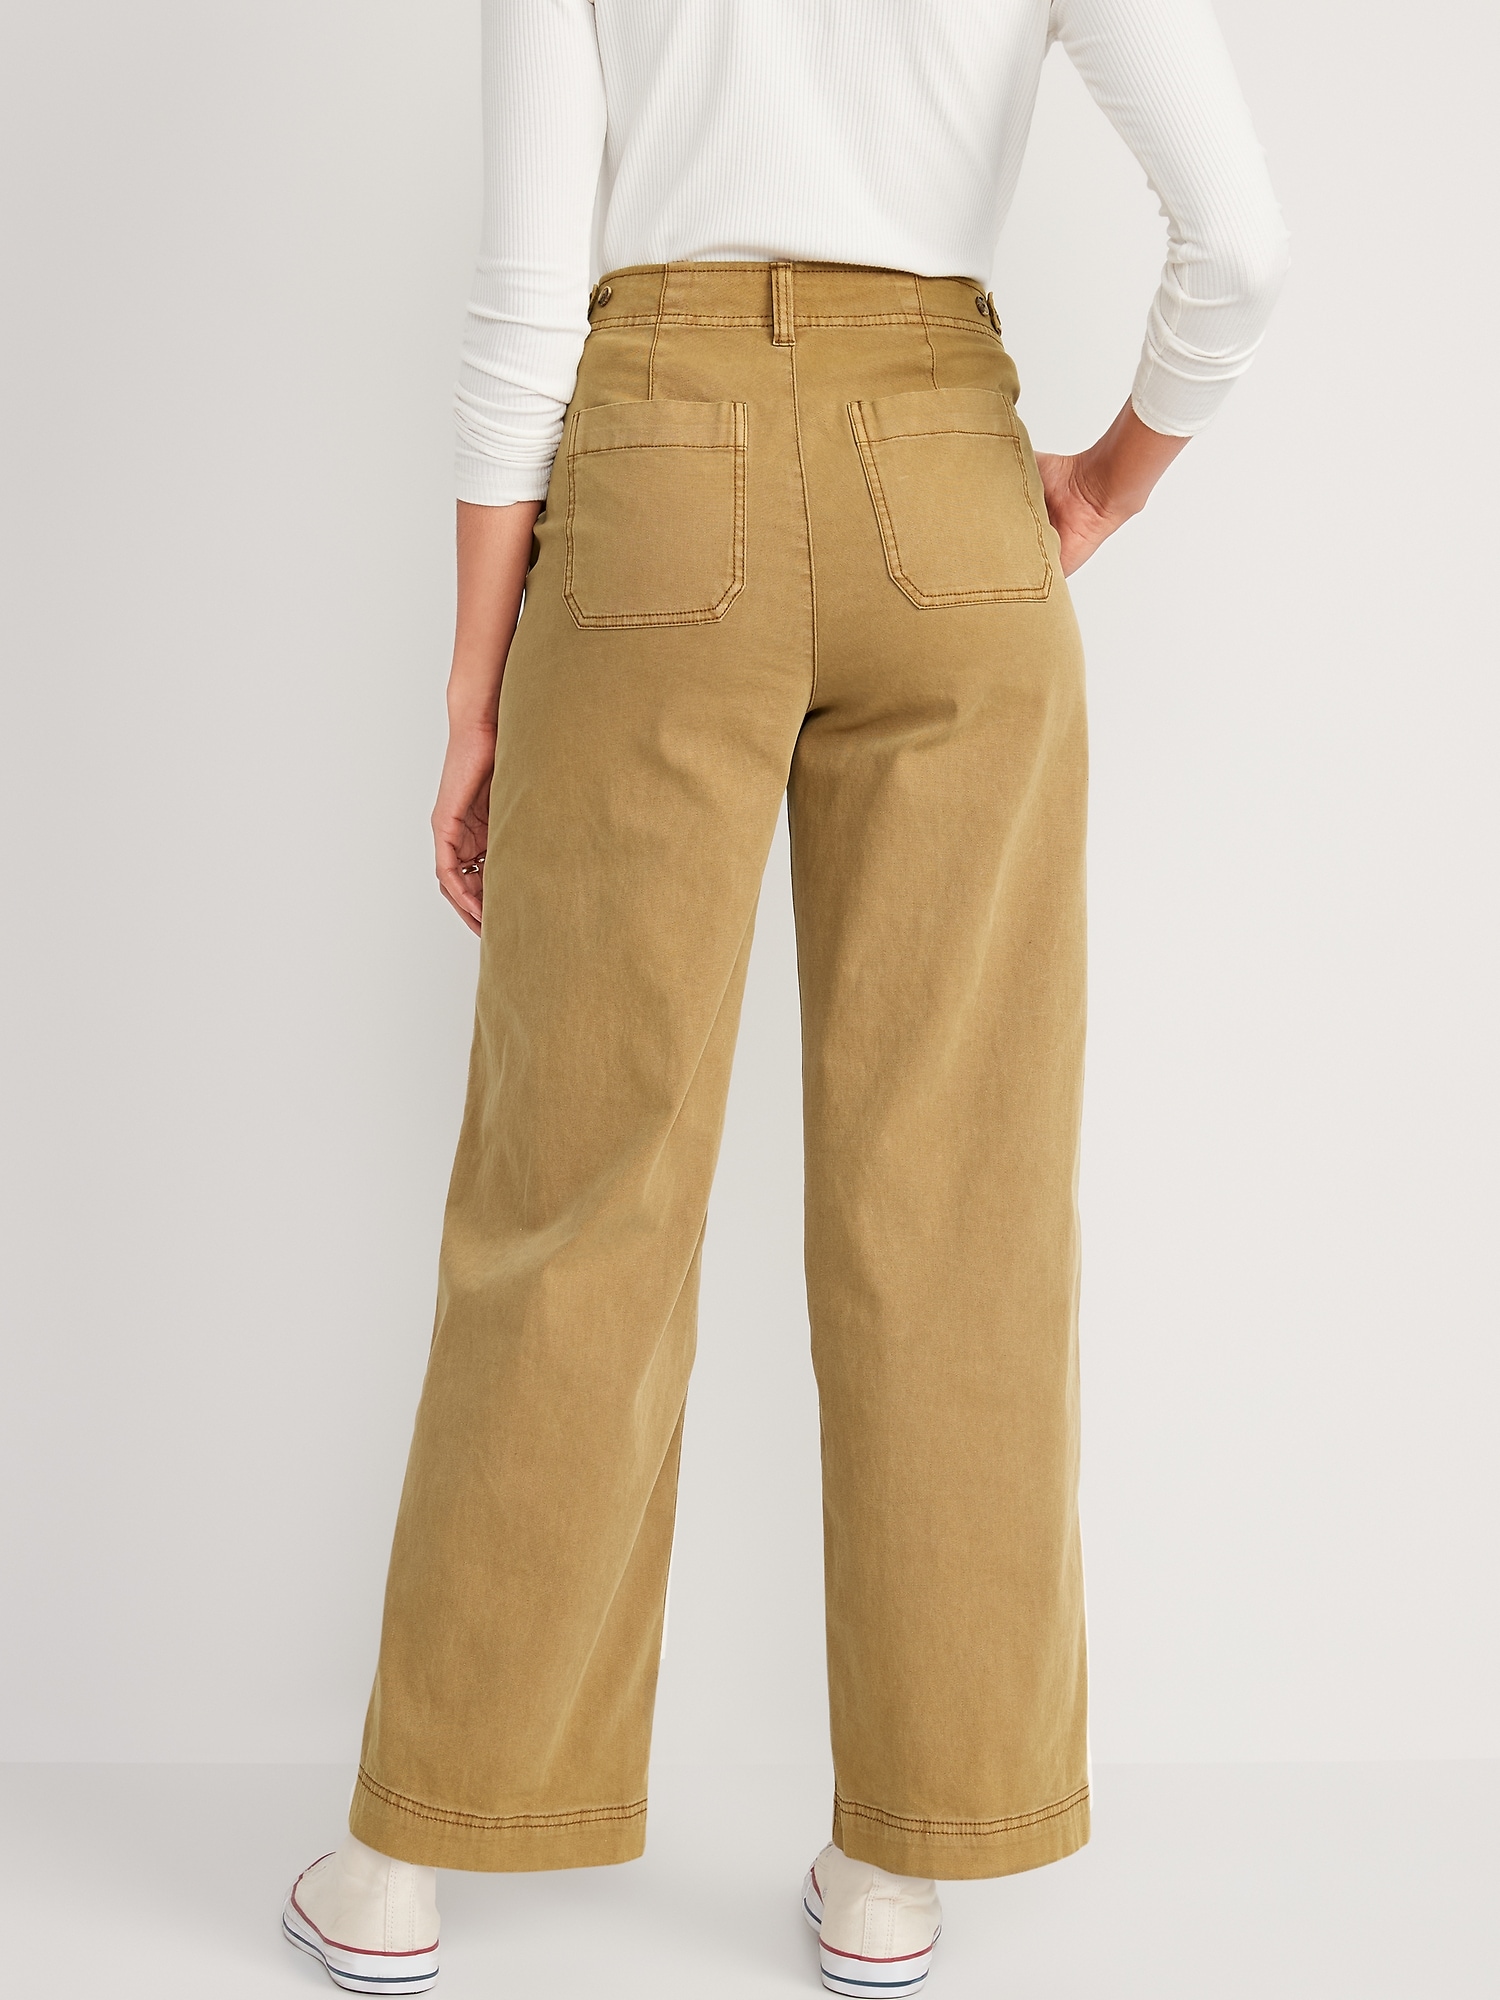 Old Navy, Pants & Jumpsuits, Nwt Old Navy High Rise Wide Leg Khaki Pants  Womens Size 4